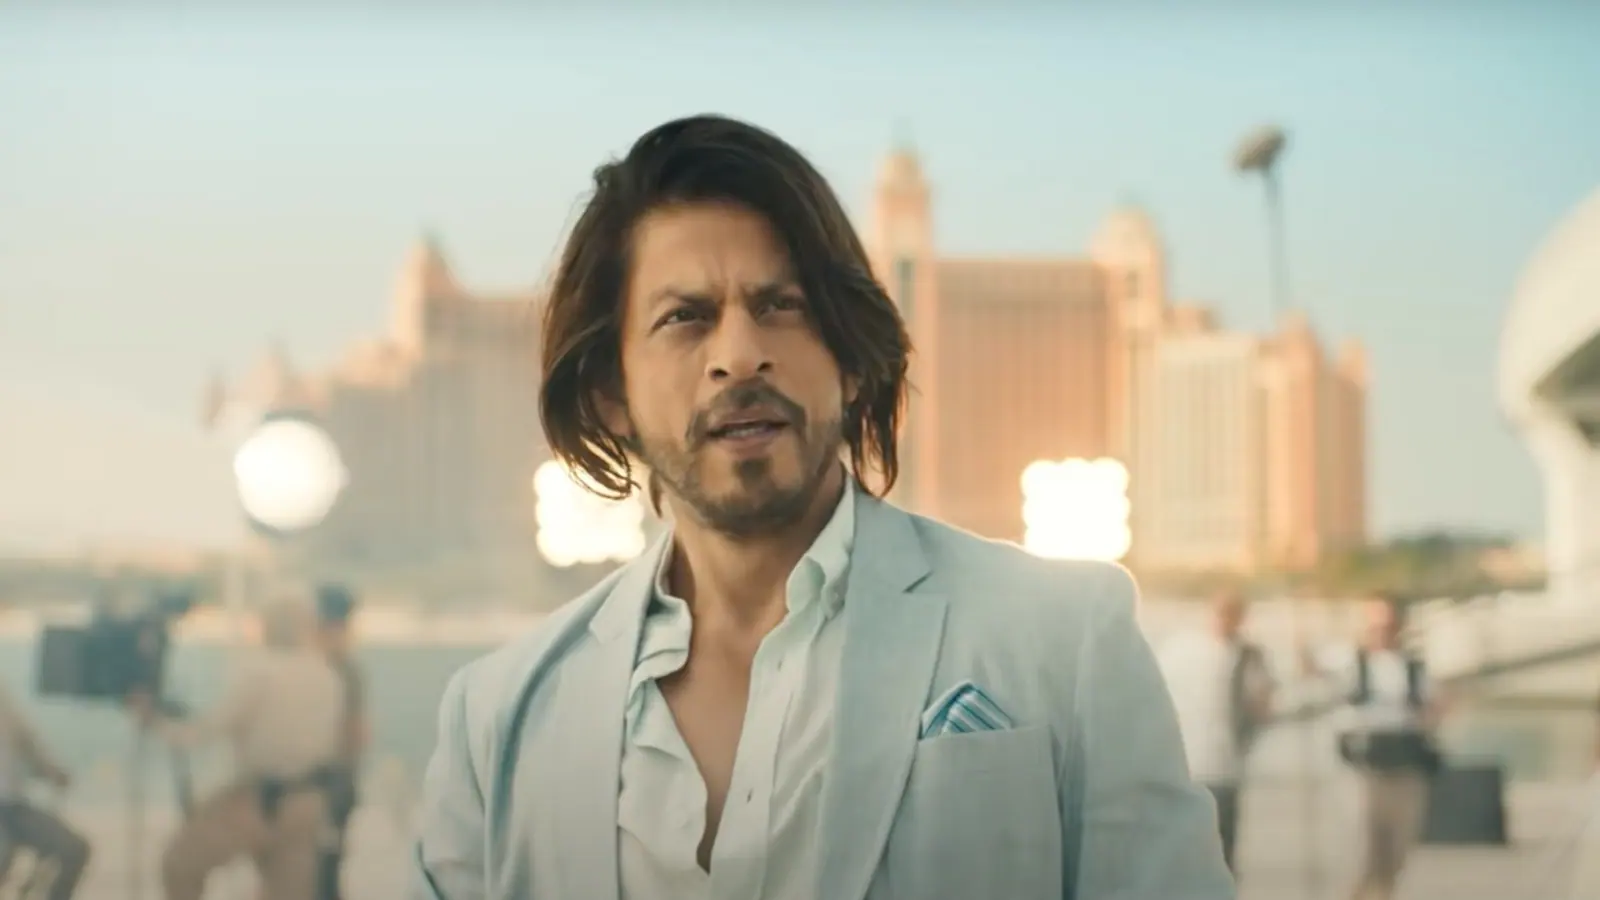 Shah Rukh Khan gives tour of Dubai in new video, gets inspired after Suhana tells him ‘Dad, don’t be boring’. Watch